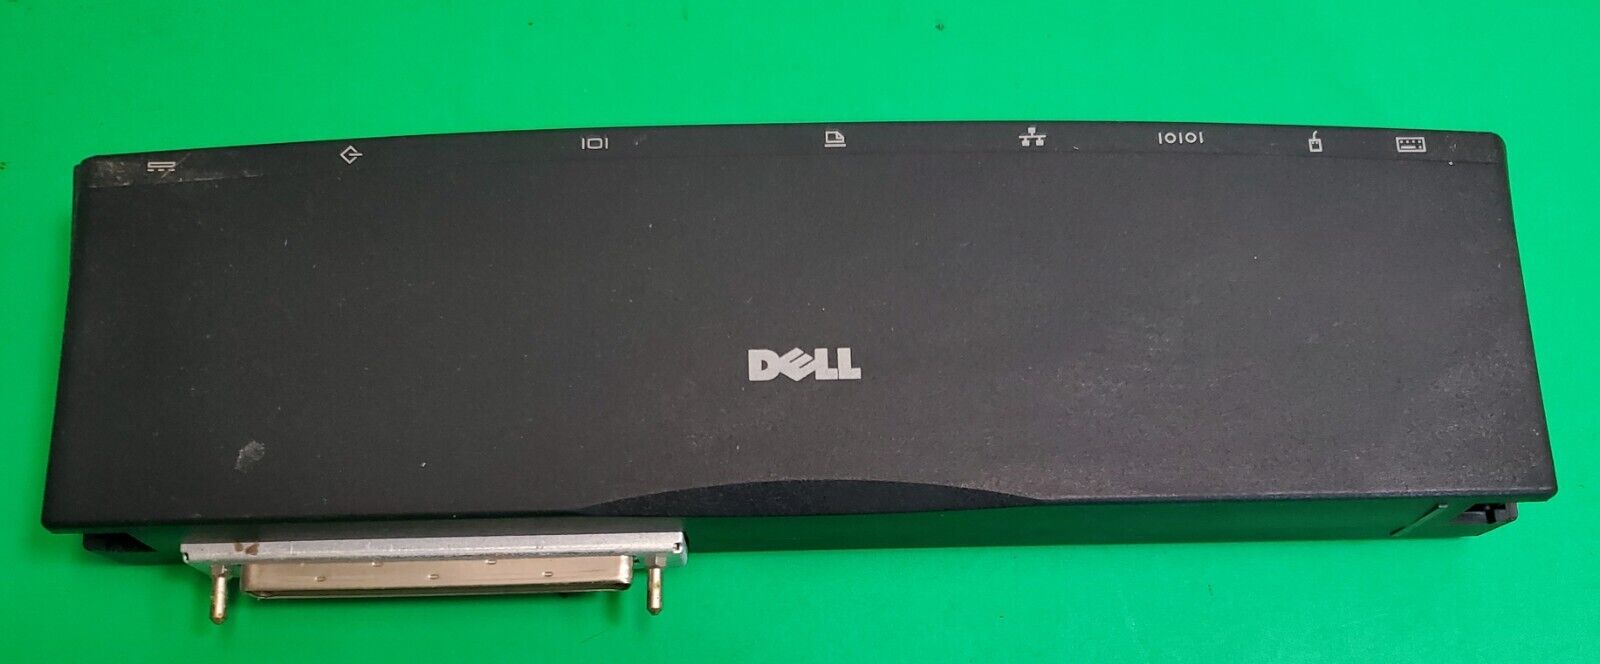 Vintage Original Dell Port Replicator Station Model: MS-1 as is untested